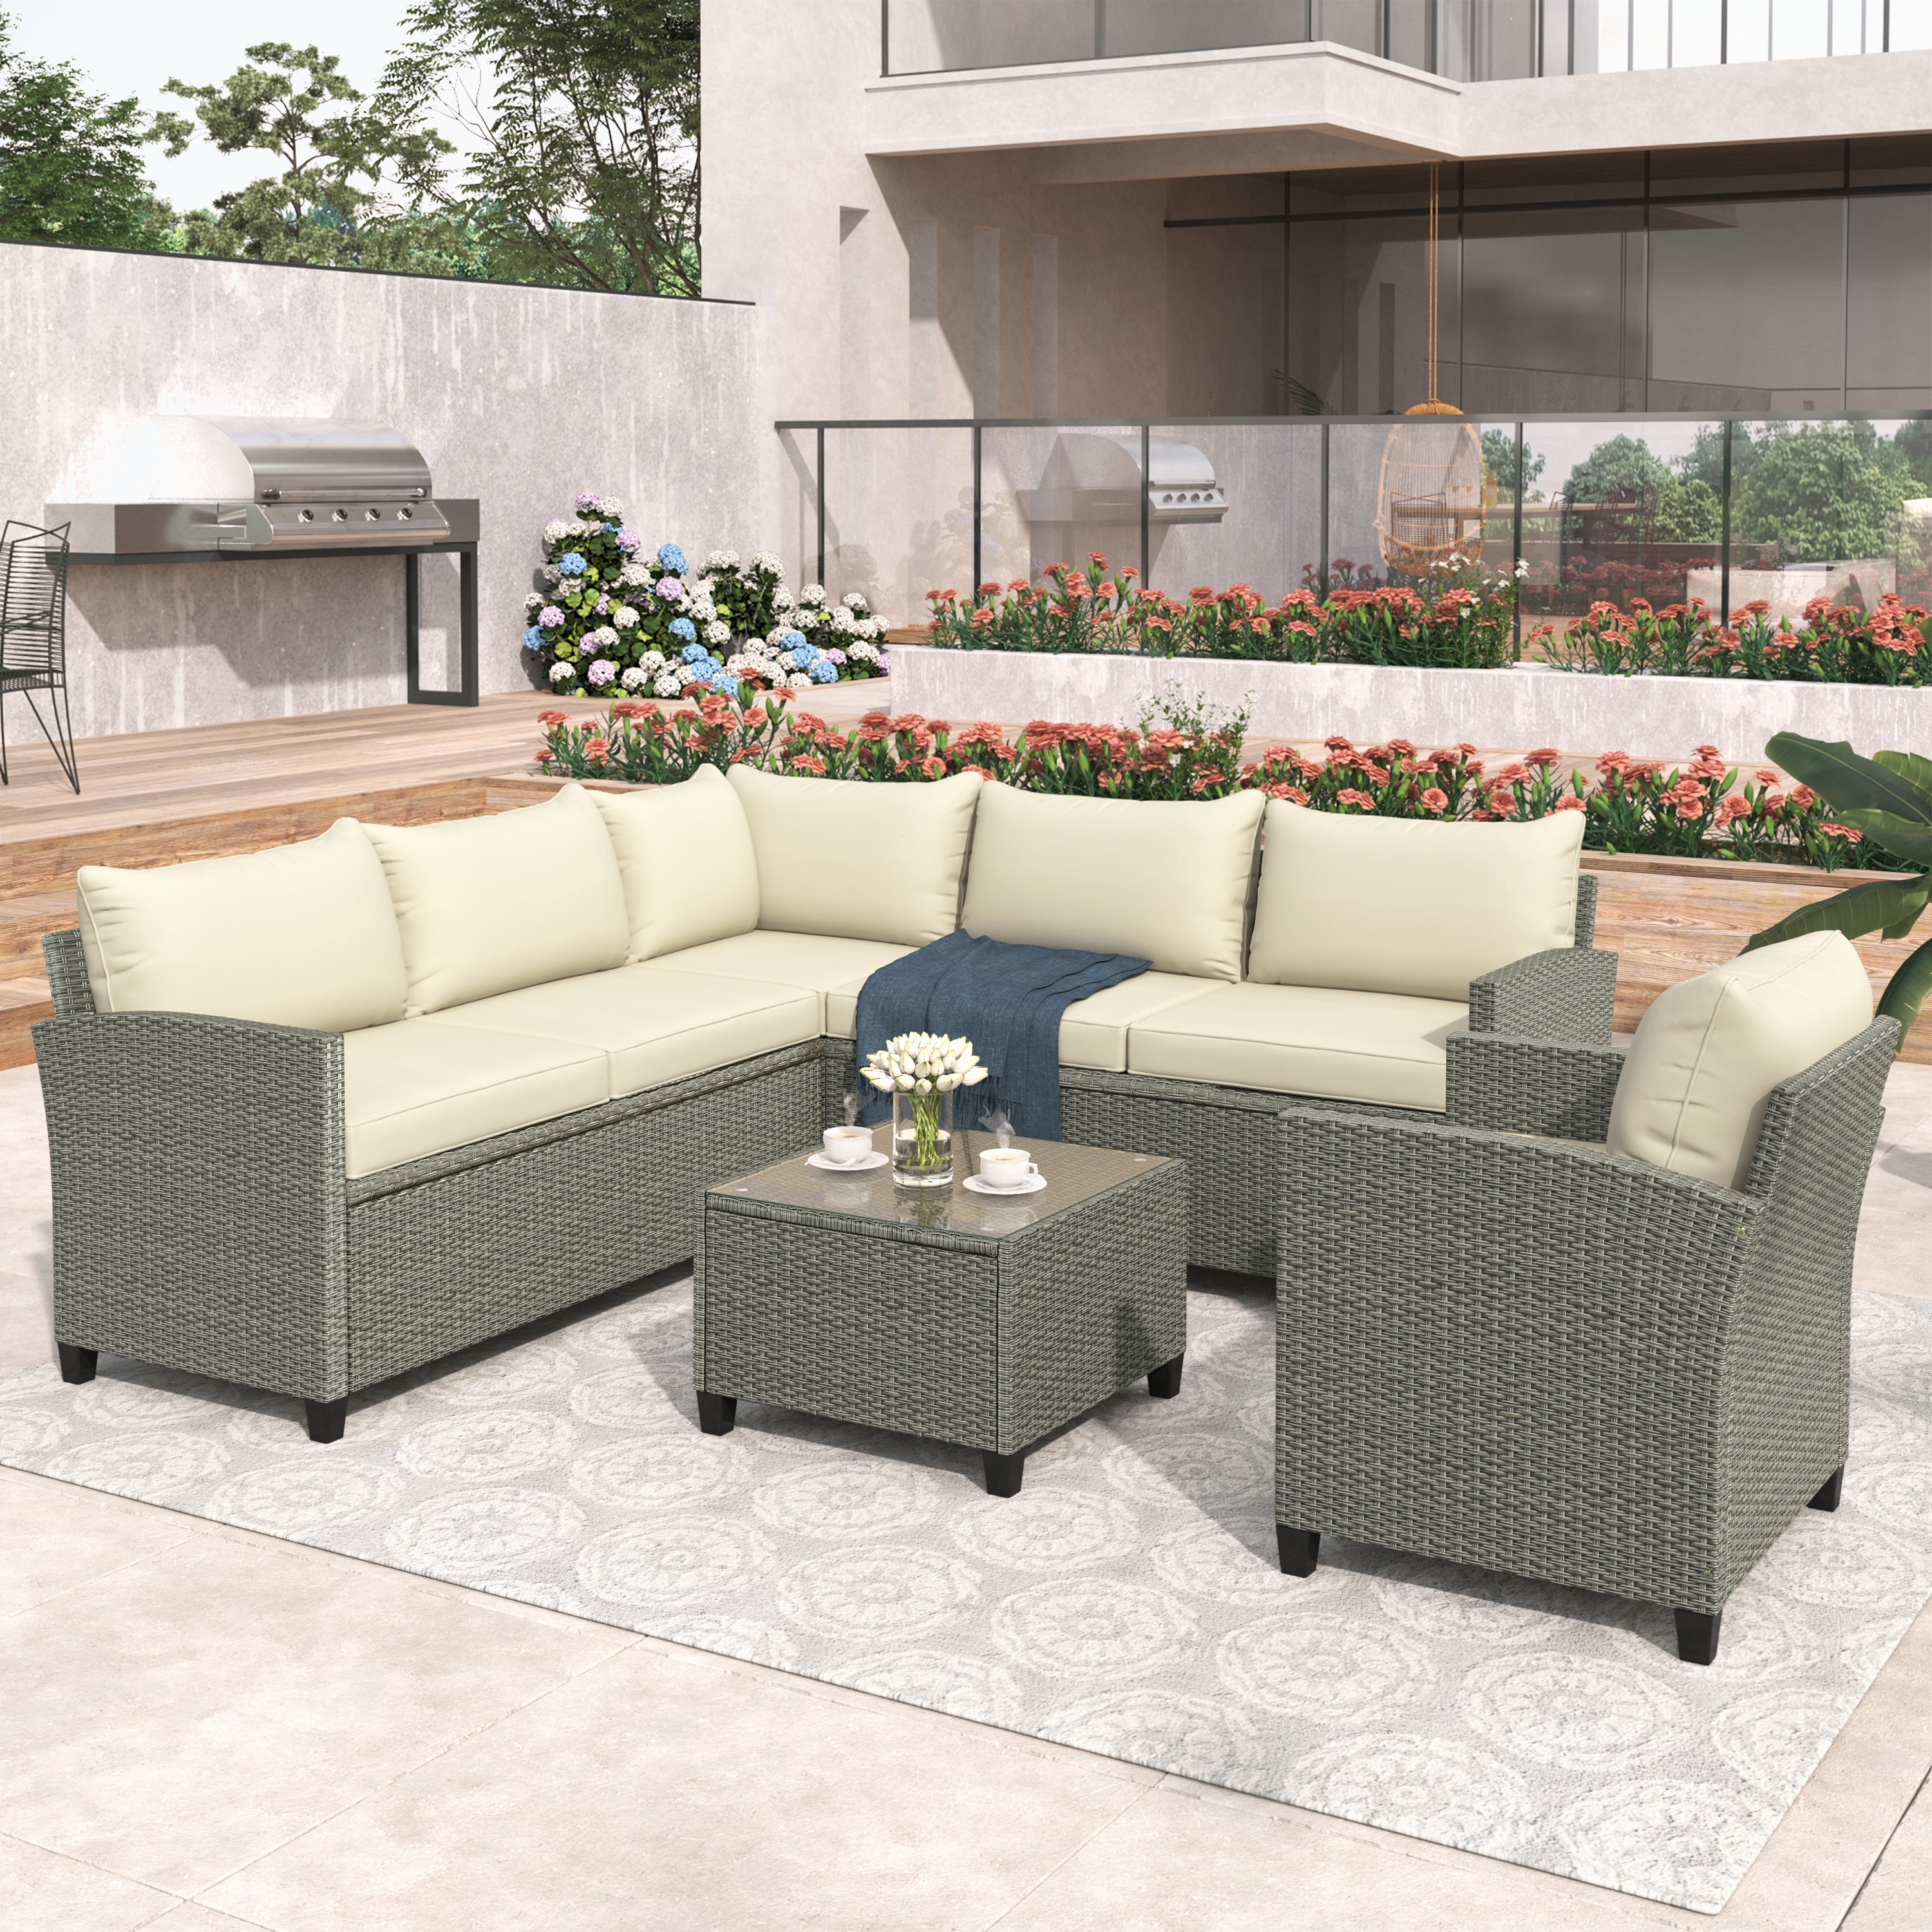 5 Piece Outdoor Conversation Set，with Coffee Table And Single Chair